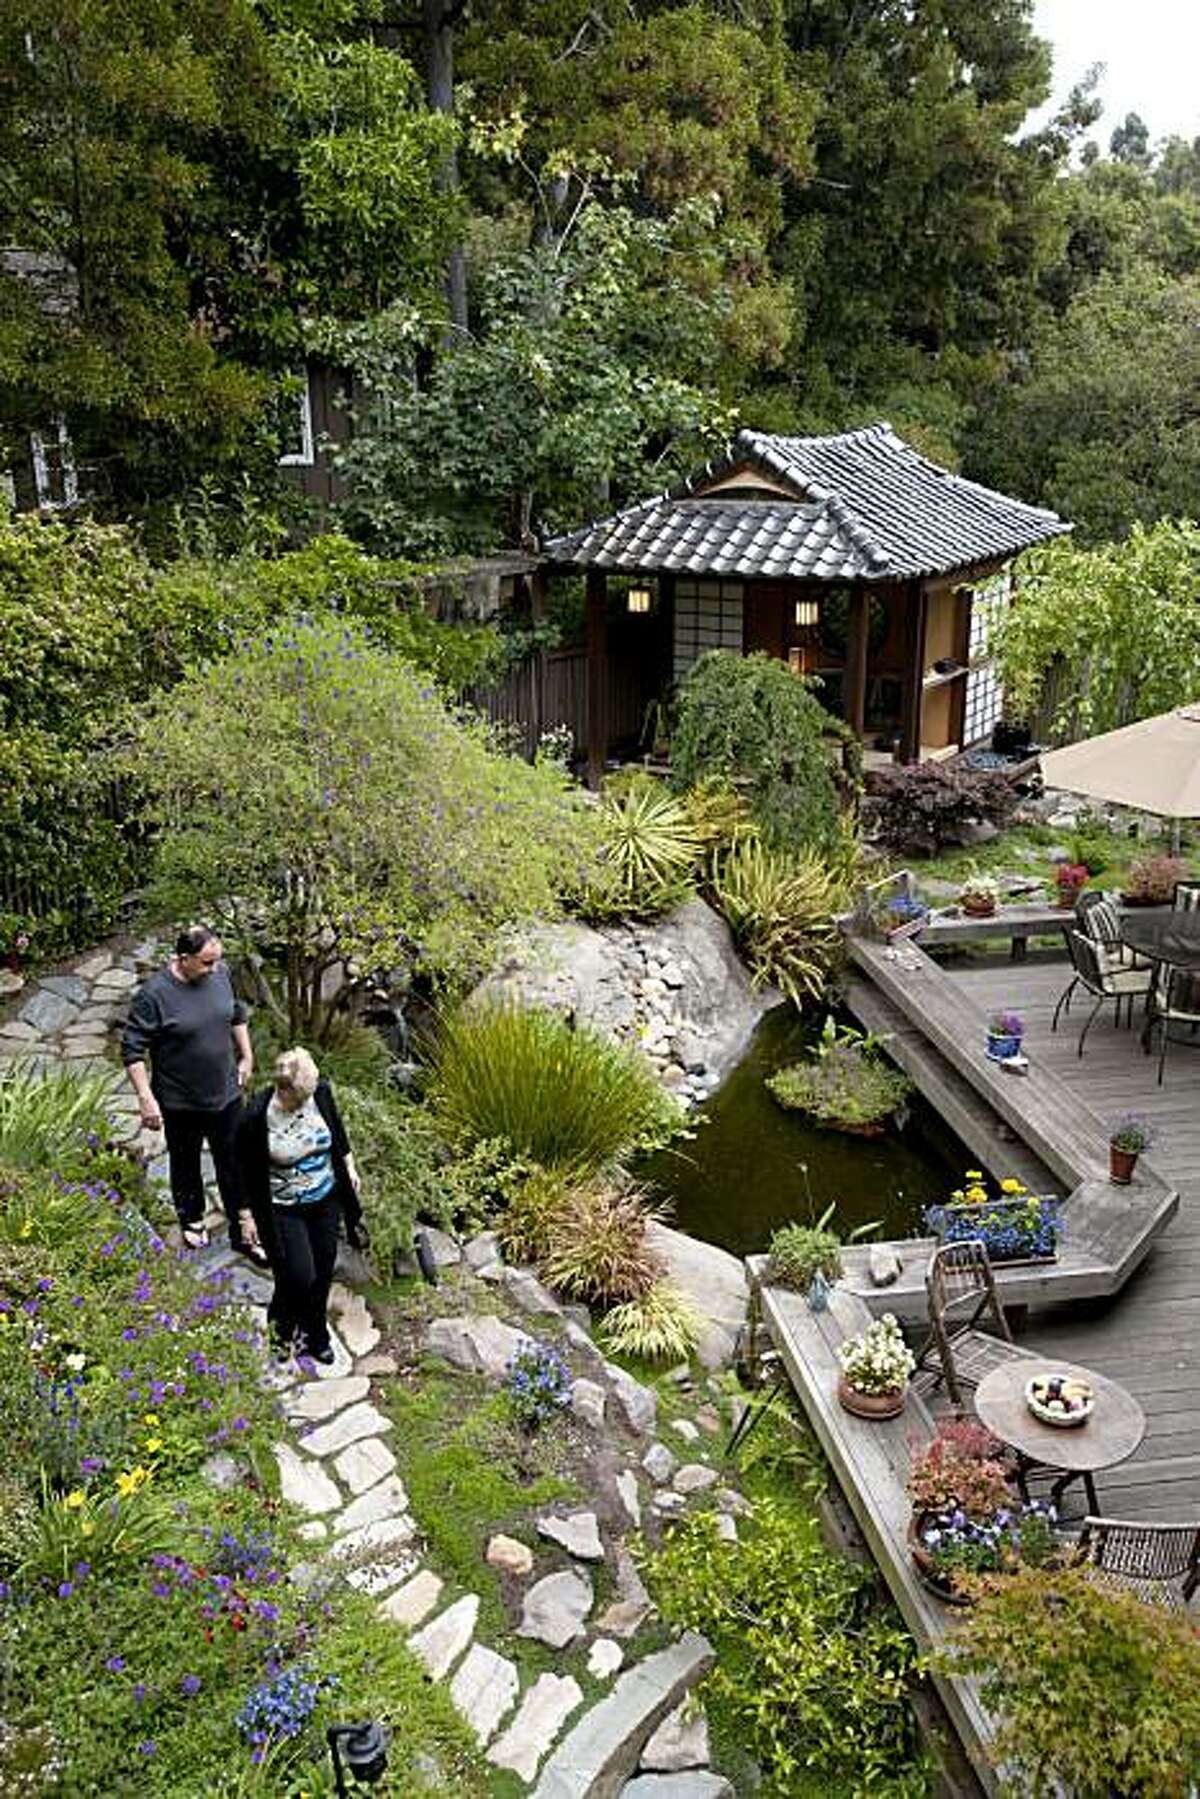 Jim and Bonnie Bell have created a personal sanctuary in their backyard that features a custom-built Japanese style tea house complete with water features and a koi pond and is photographed in Berkeley, Calif., on Sunday, August 8, 2010.